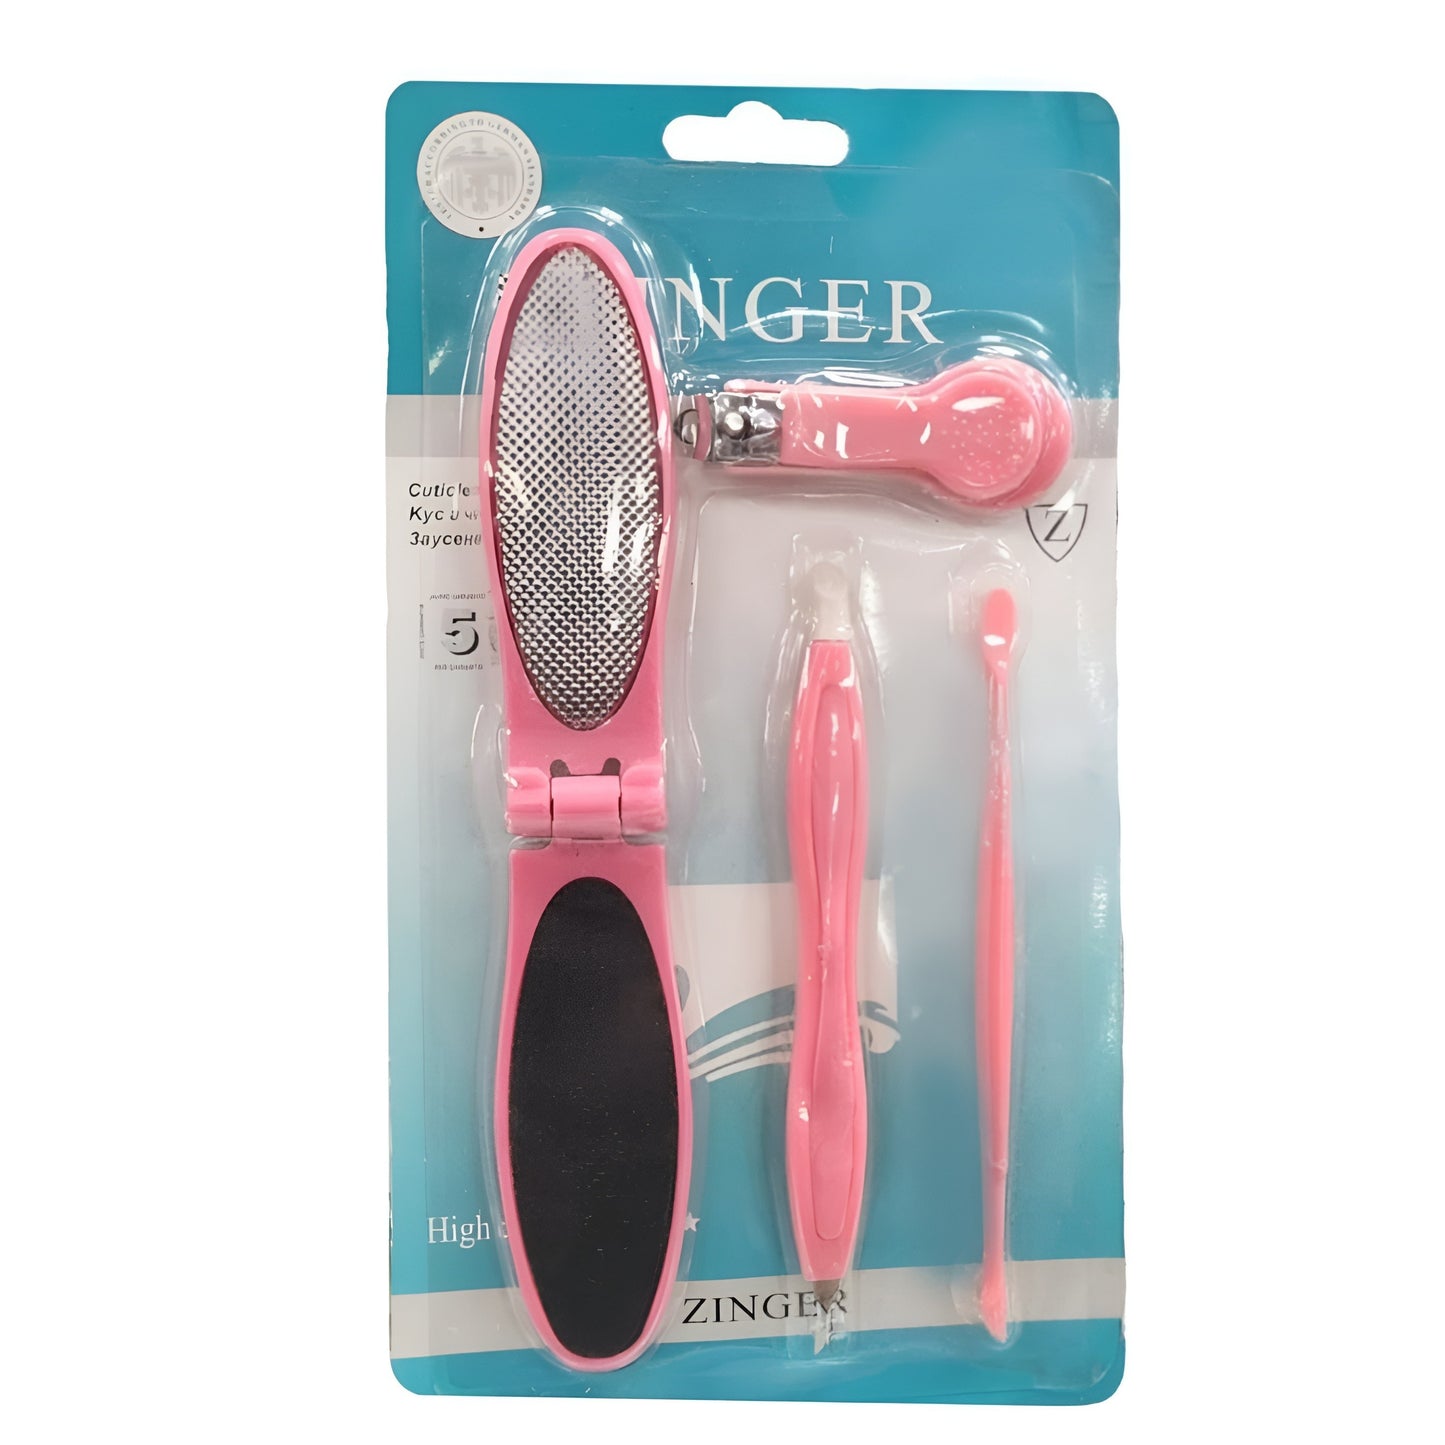 4 in 1 Foot Care Pedicure Kit By Zinger